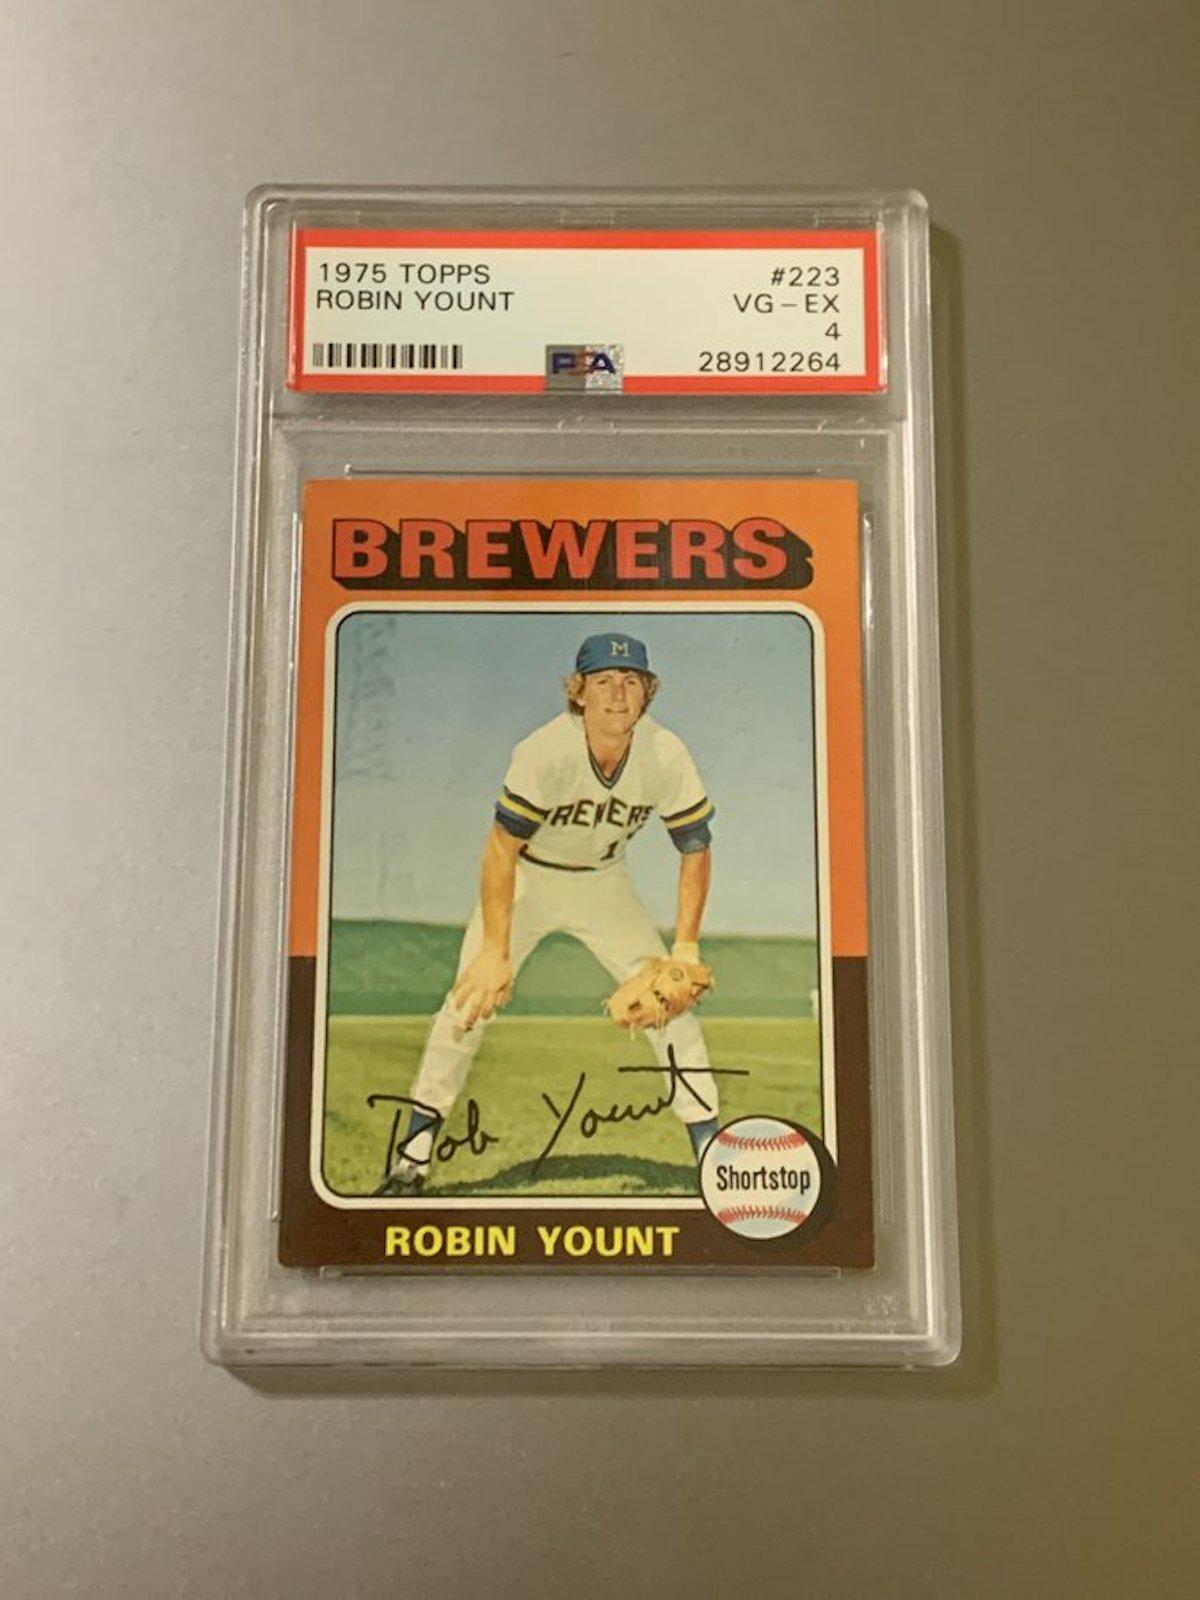 25 Most Valuable 1982 Topps Baseball Cards - Old Sports Cards